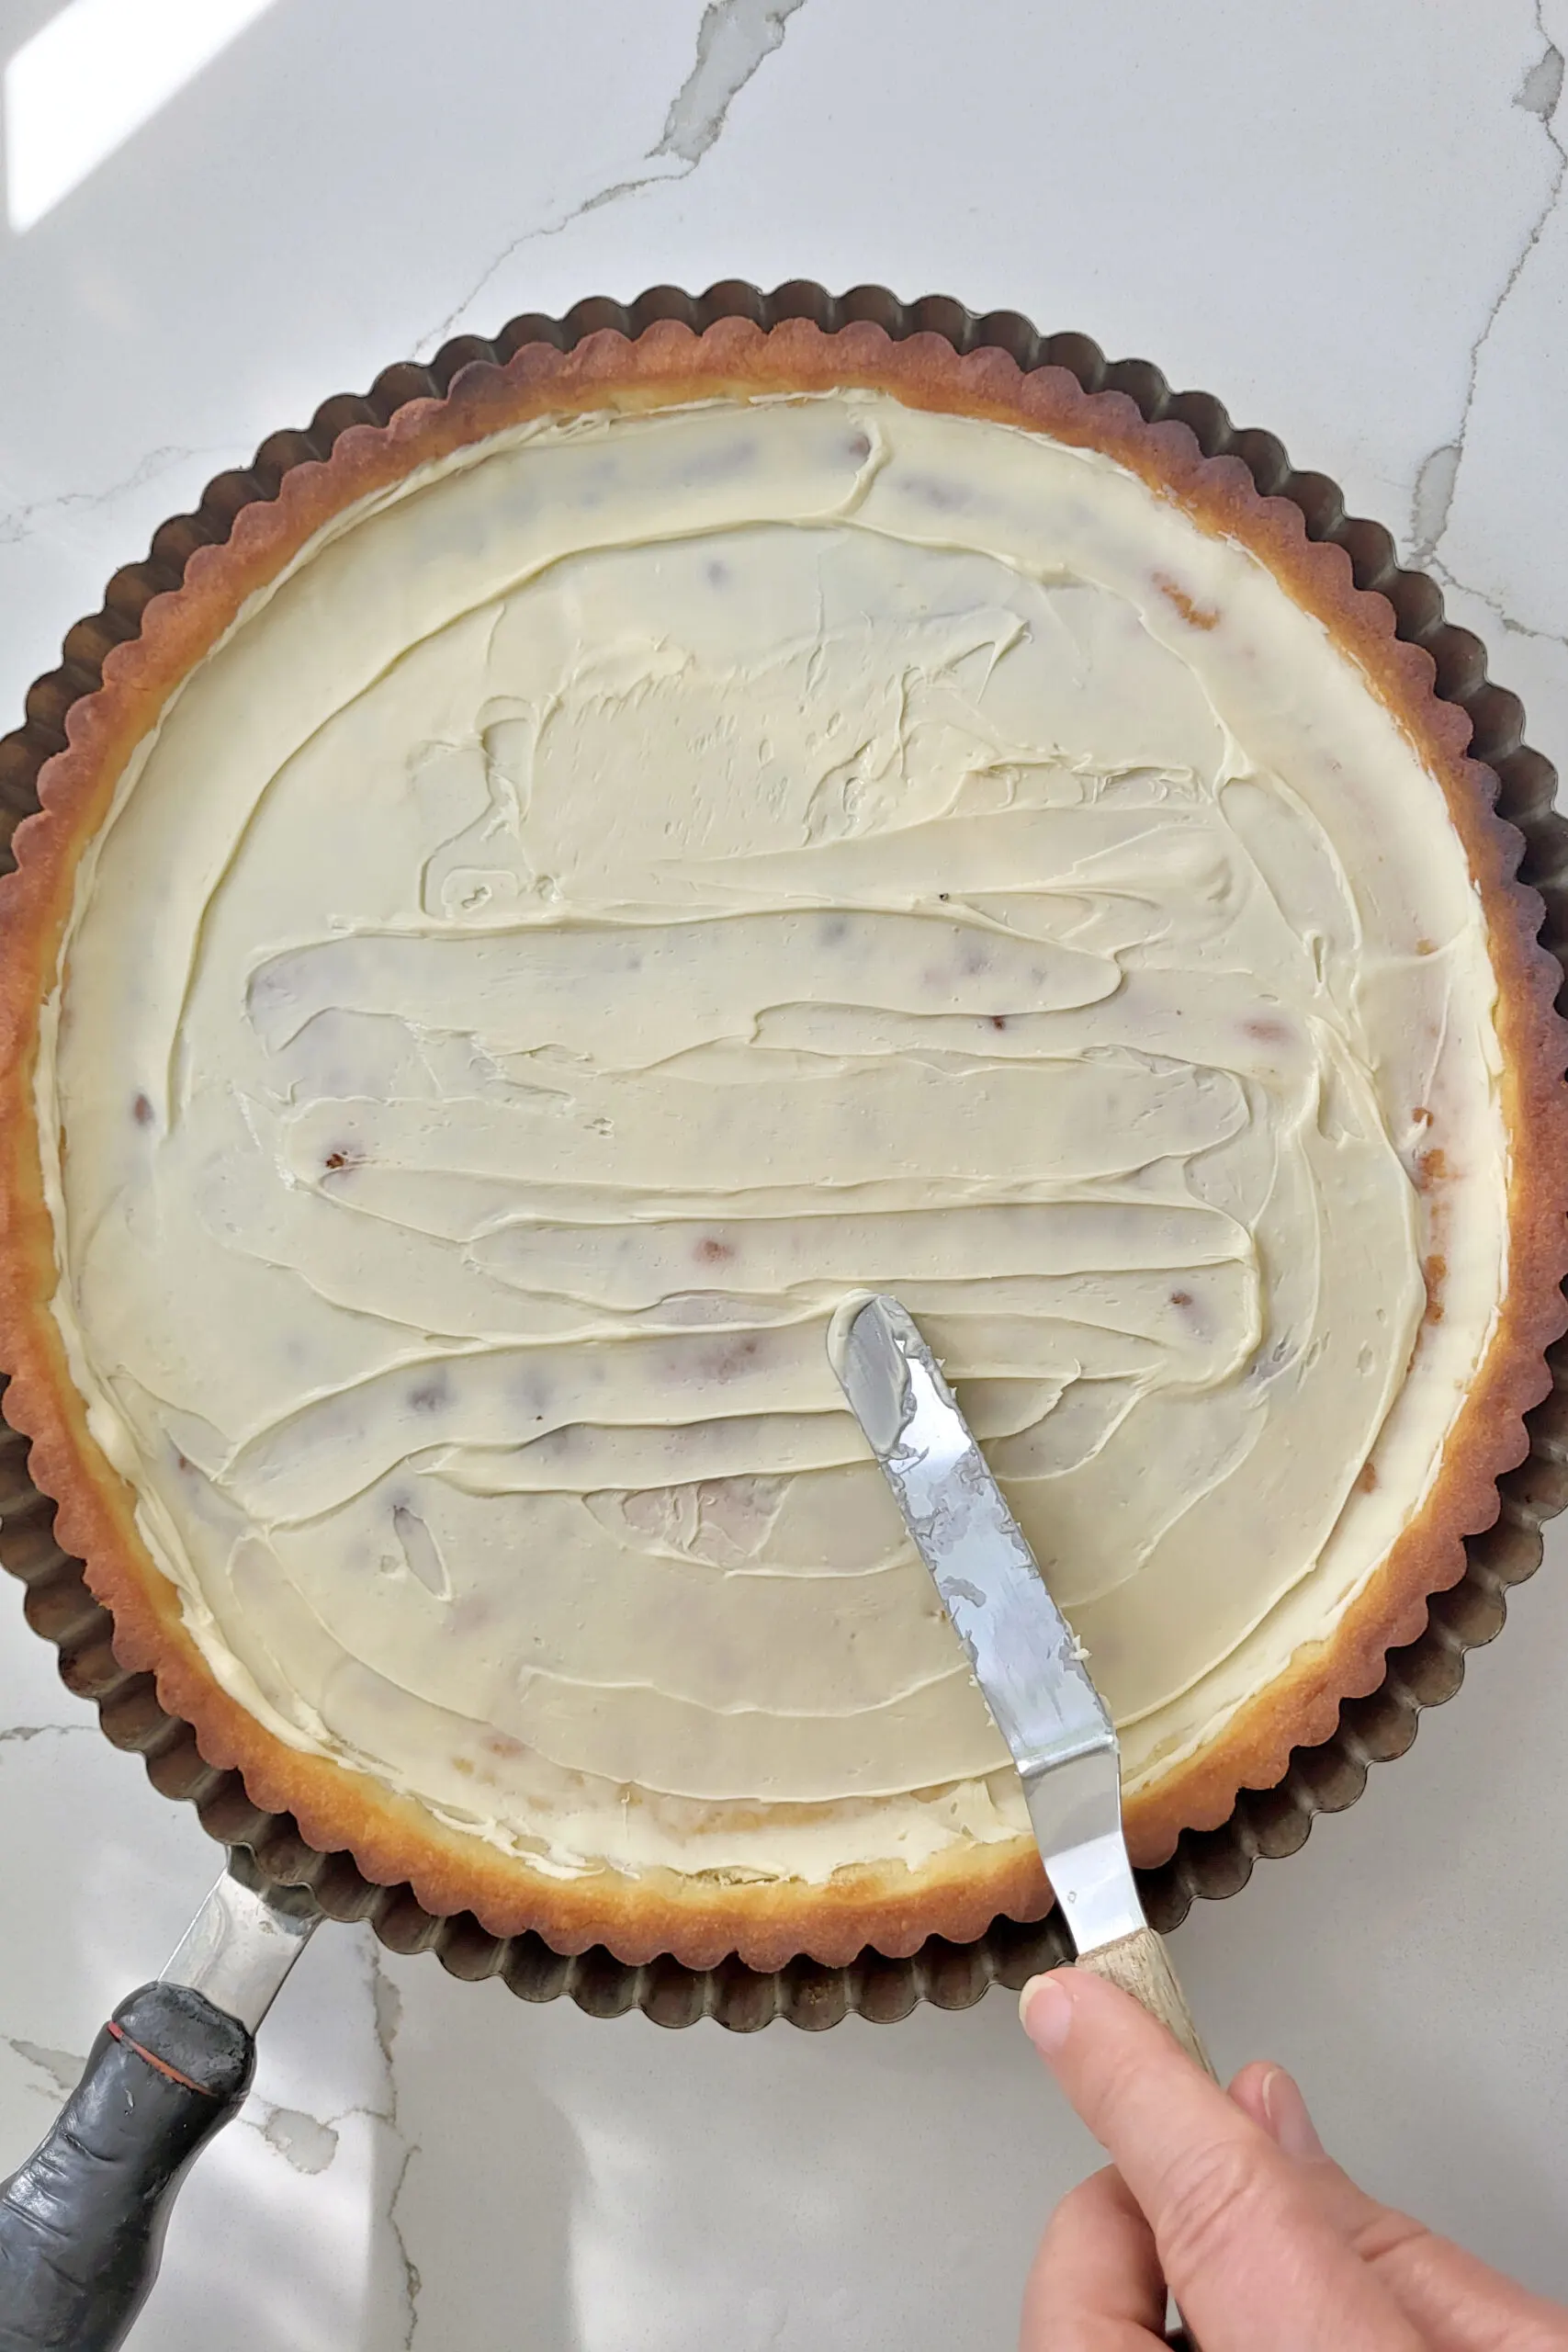 a baked tart shell coated with white chocolate.